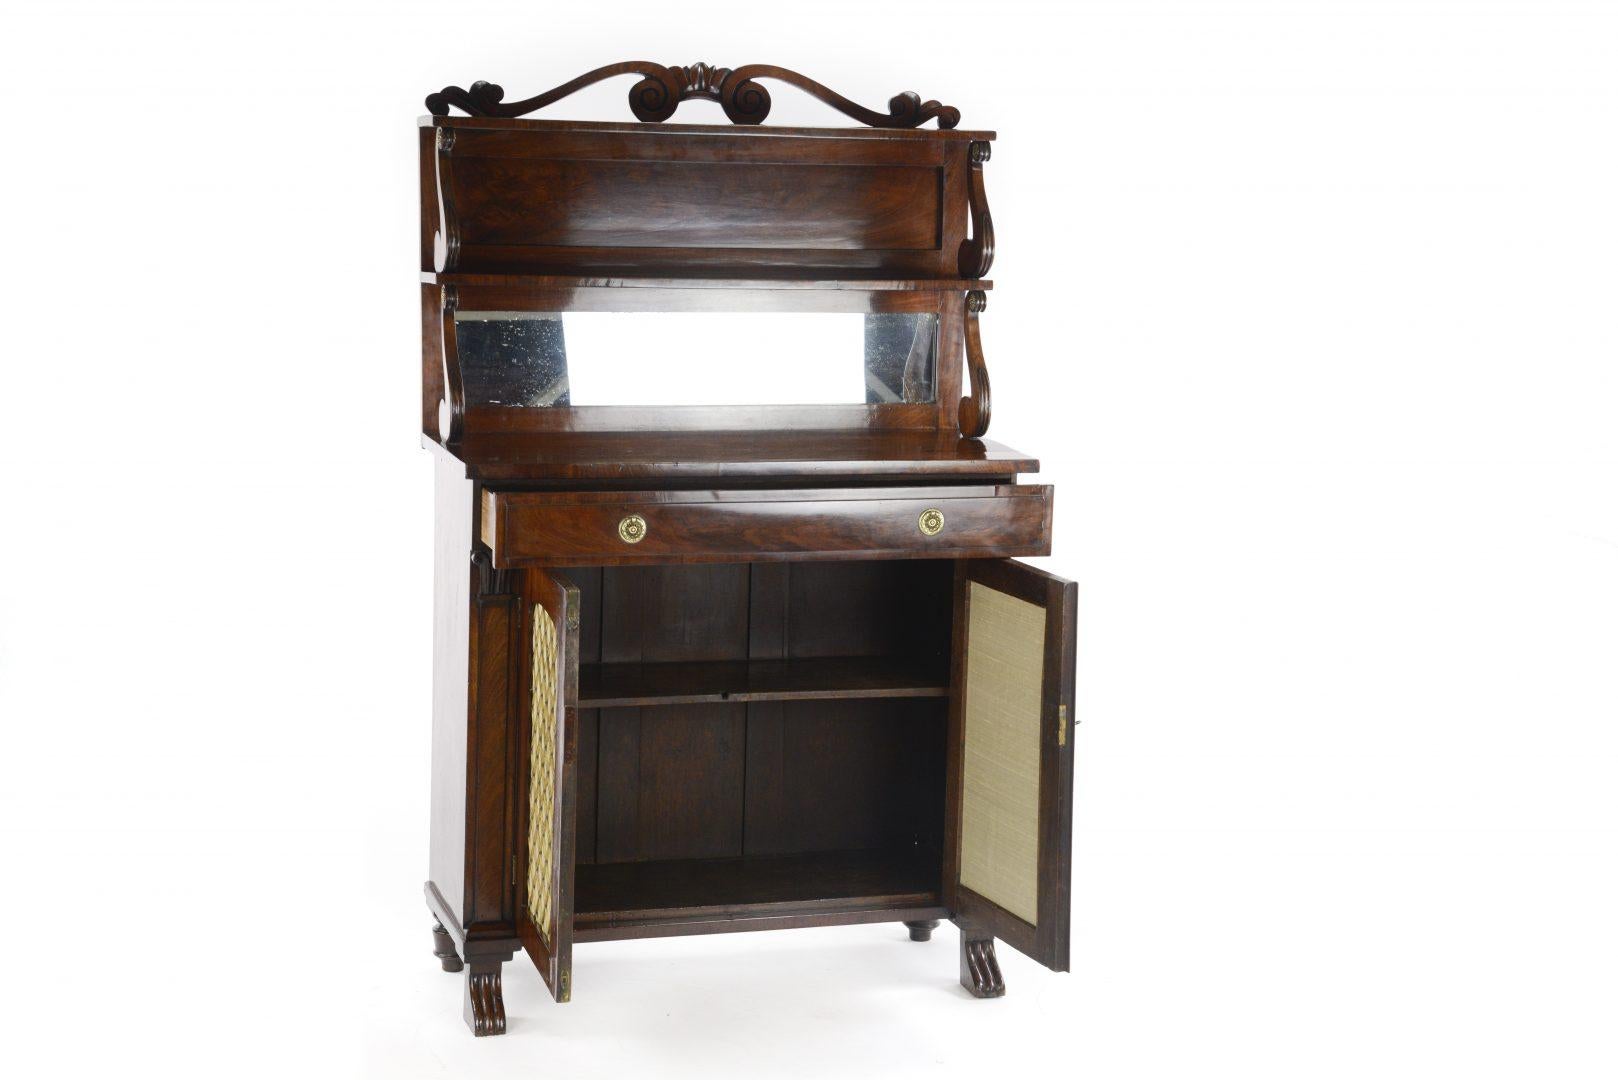 A modest George IV mahogany chiffonier dating to circa 1825, having an upper section with two mahogany shelves with a gallery supported on finely carved brackets, two rectangular mahogany doors with brass grilles and silk lined panels and having